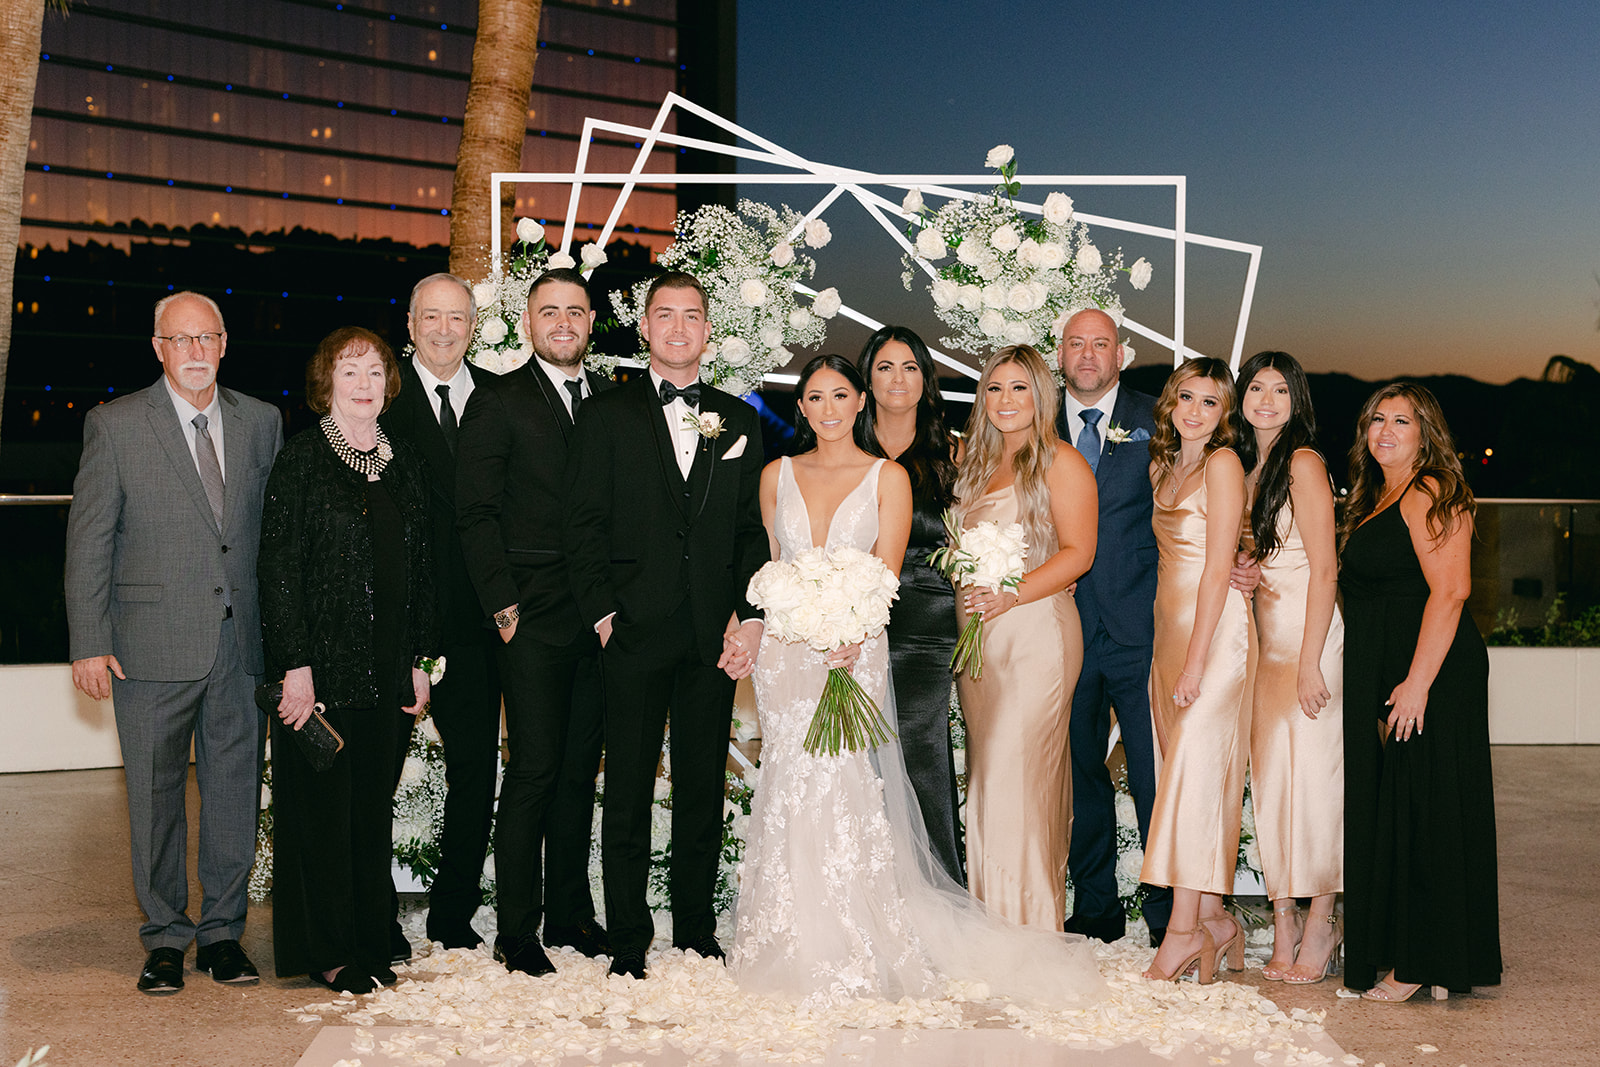 Family portrait after wedding ceremony at Red Rock Casino 